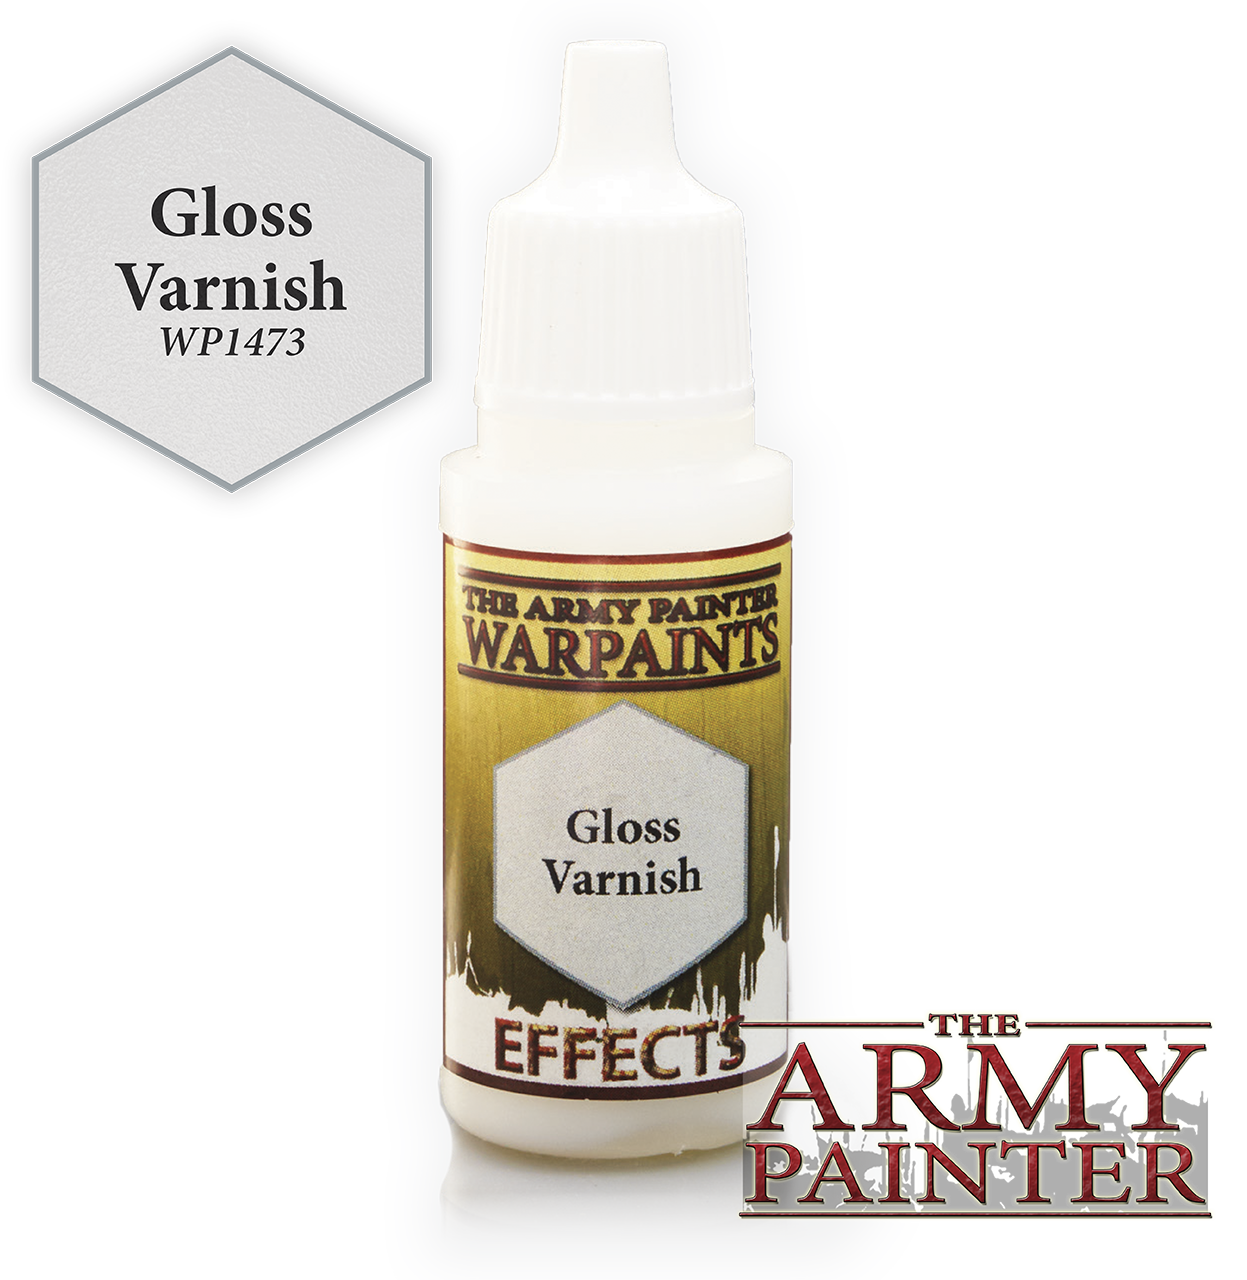 The ARMY PAINTER: Effects Warpaints - Gloss Varnish | Tacoma Games